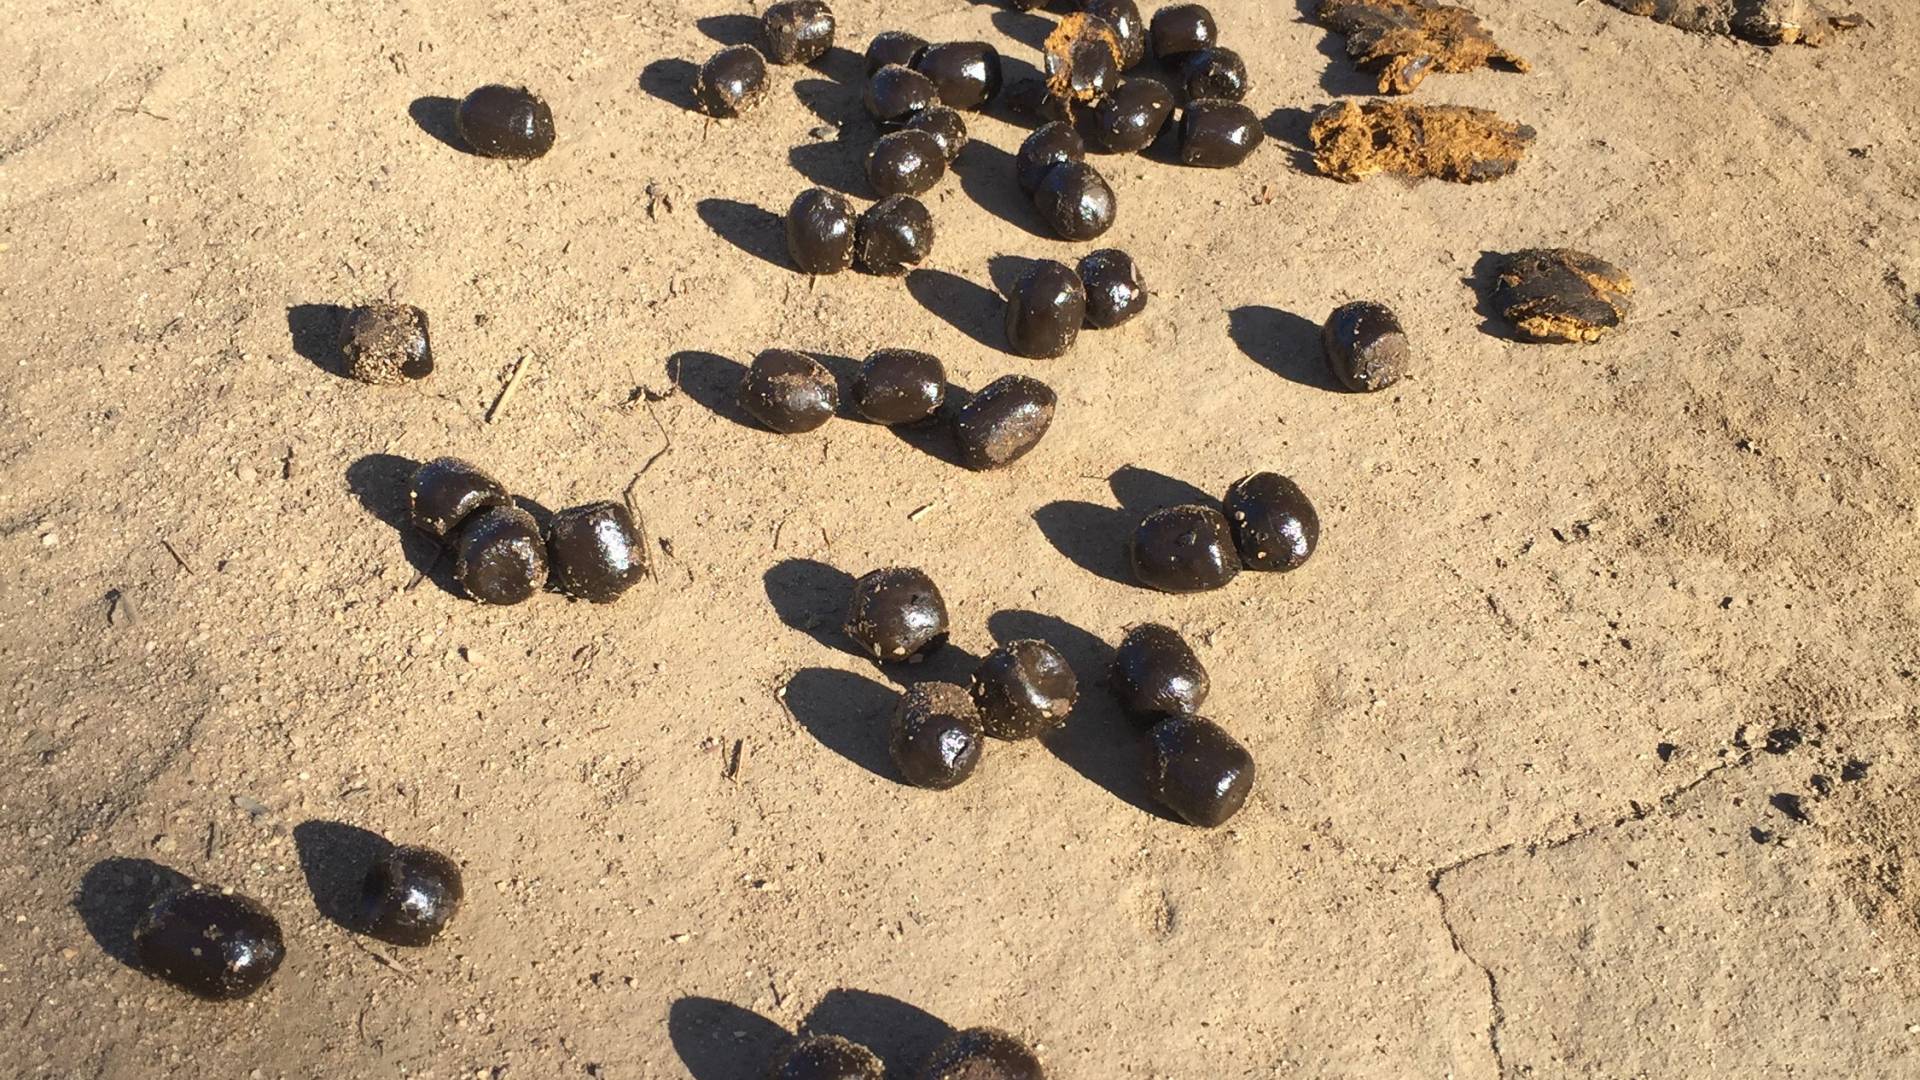 A trail of ball-shaped poop